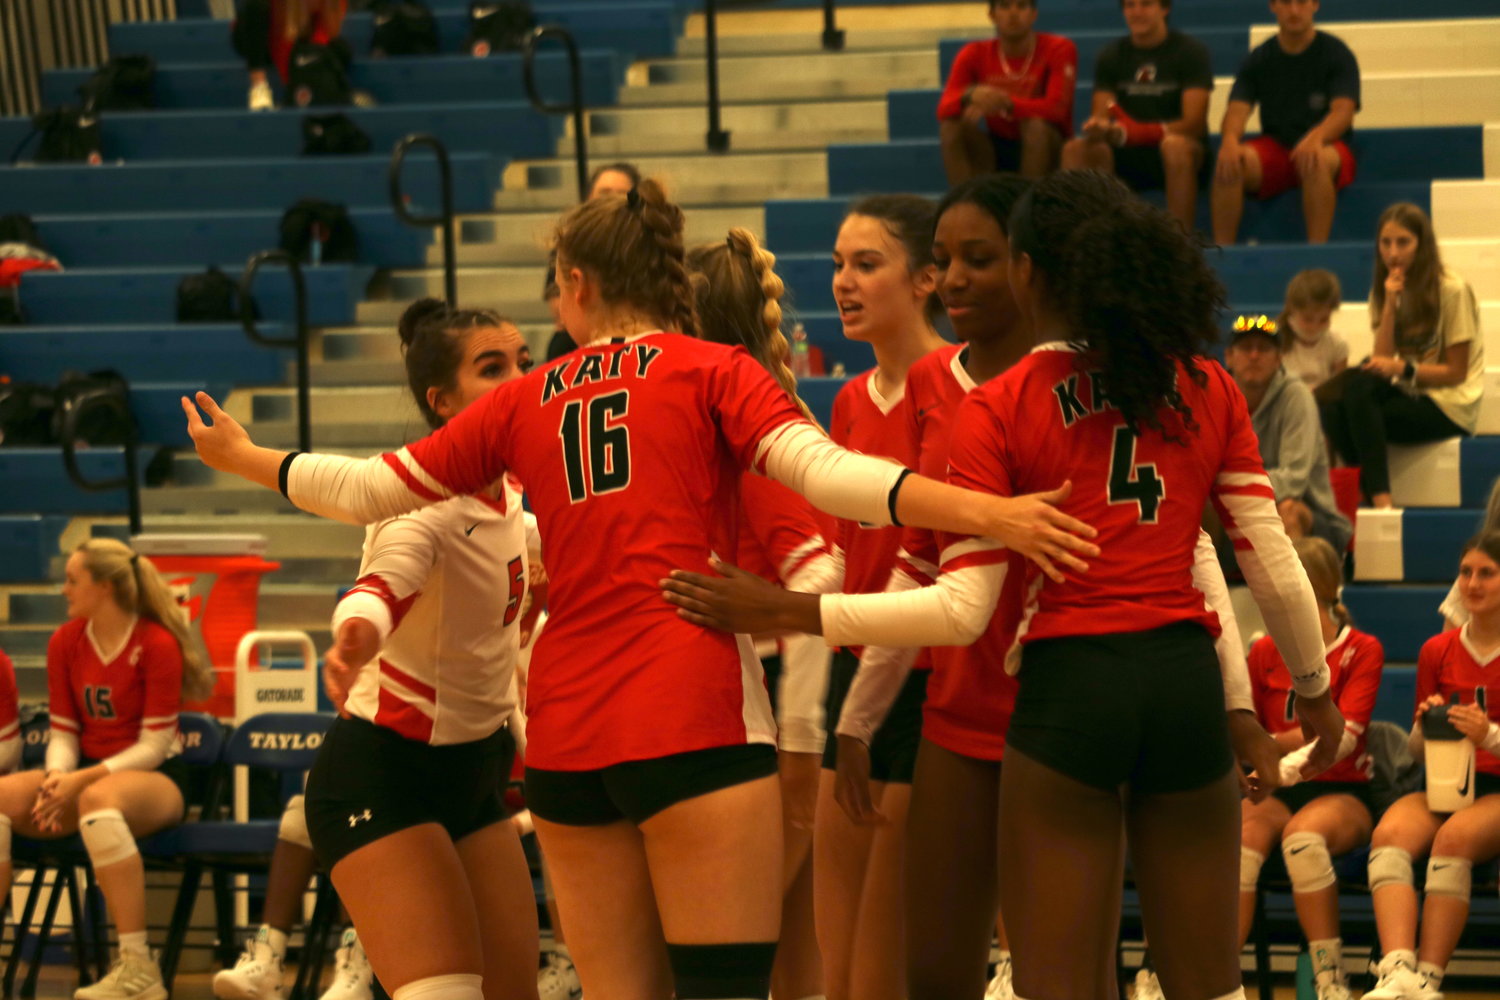 Katy players huddle together after a point during a District 19-6A match against Taylor at the Taylor gym.